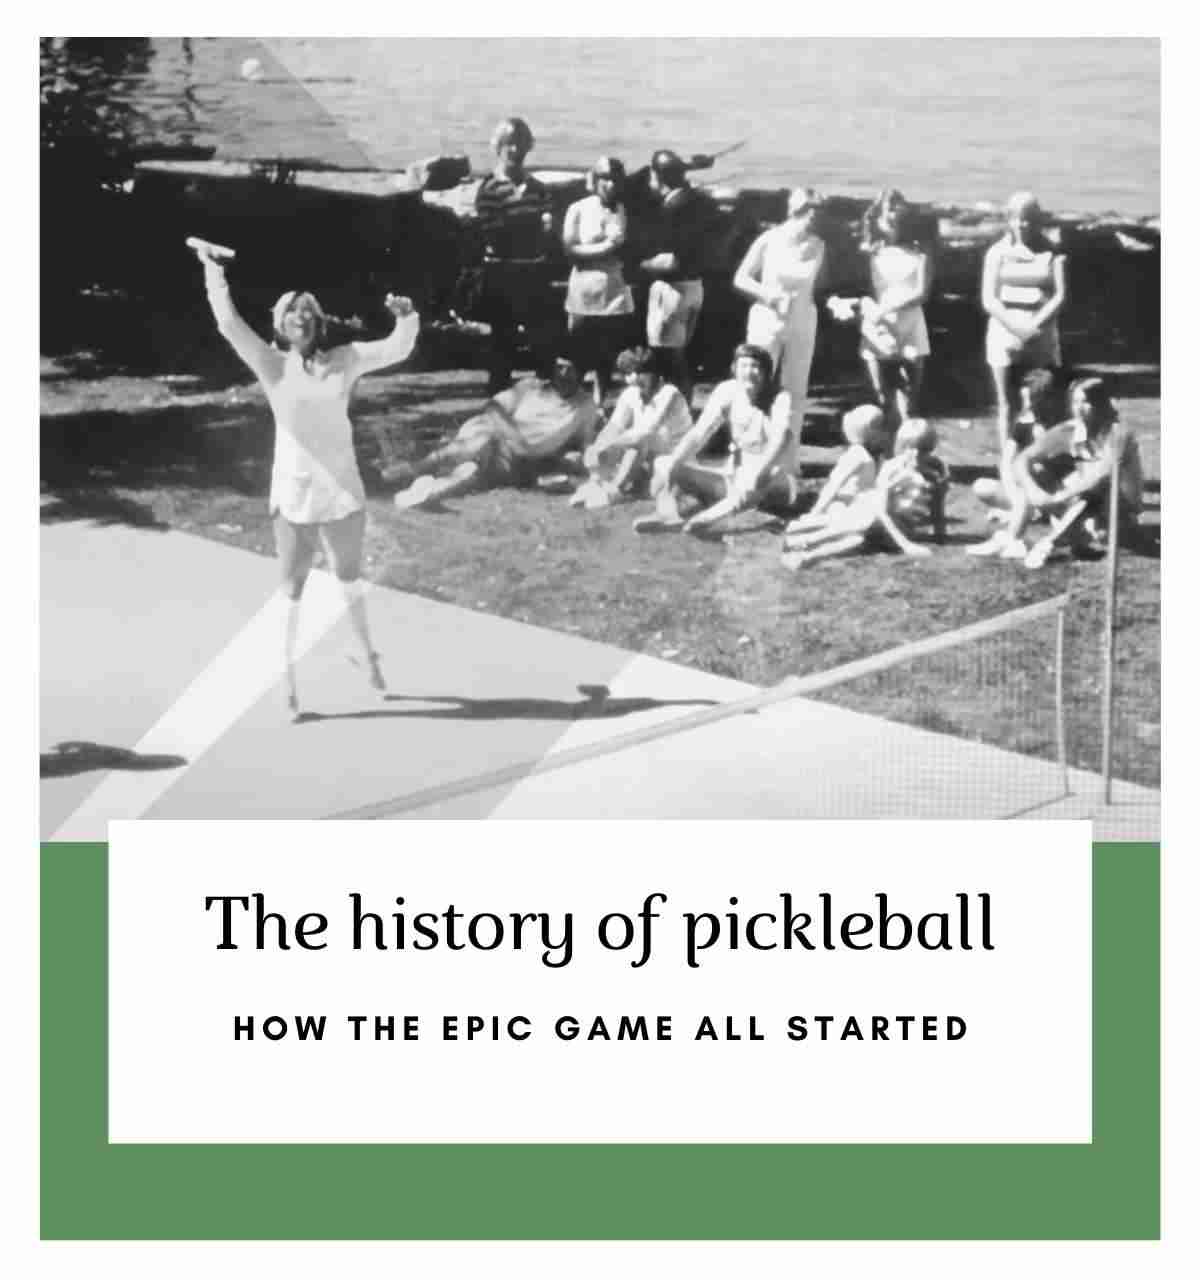 THE HISTORY OF PICKLEBALL